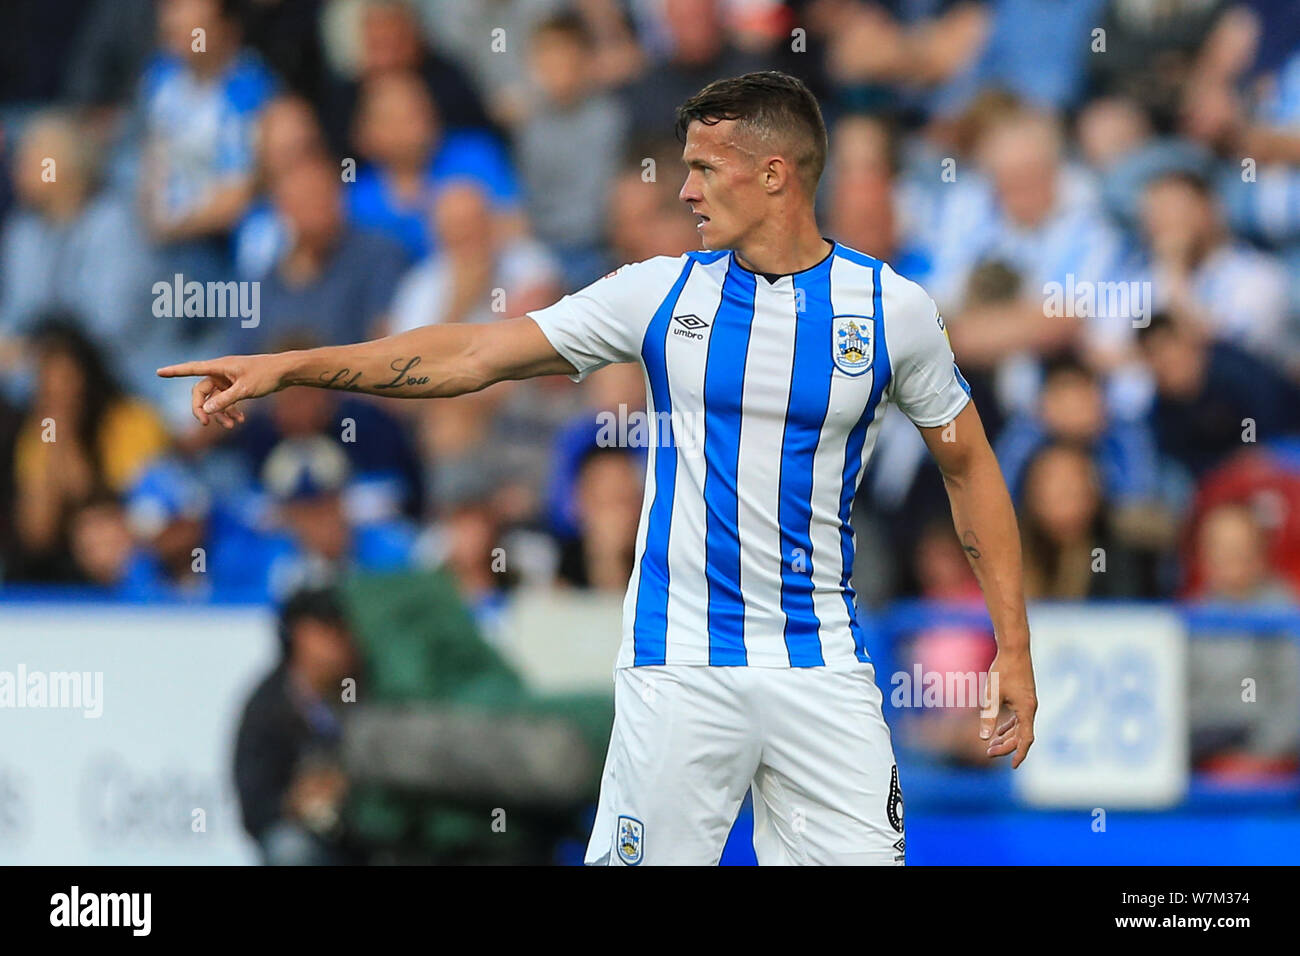 5th August 2019, John Smiths Stadium, Huddersfield England; Sky Bet Championship, Huddersfield Town vs Derby County ; Jonathan Hogg (6) of Huddersfield Town during the game  Credit: Mark Cosgrove/News Images  English Football League images are subject to DataCo Licence Stock Photo